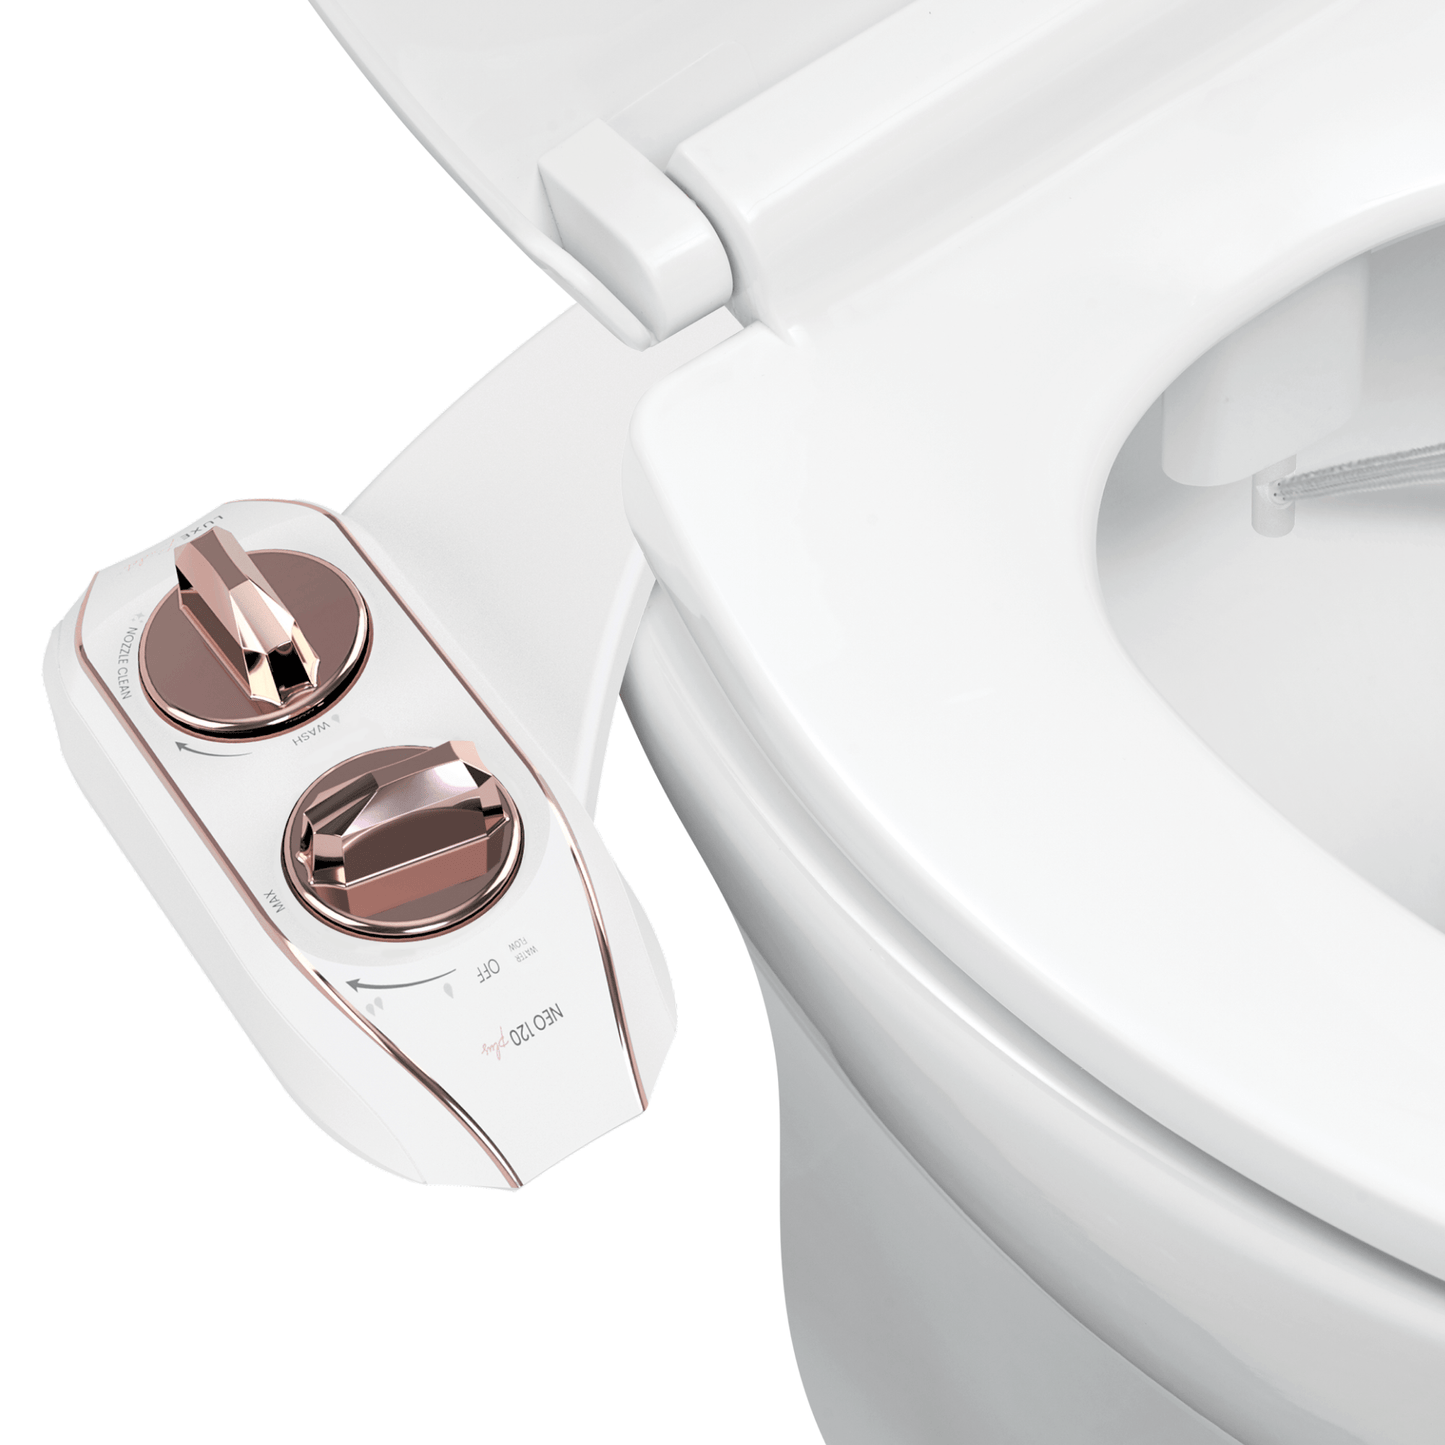 NEO 120 Plus Rose Gold installed on a toilet with water spraying from nozzles